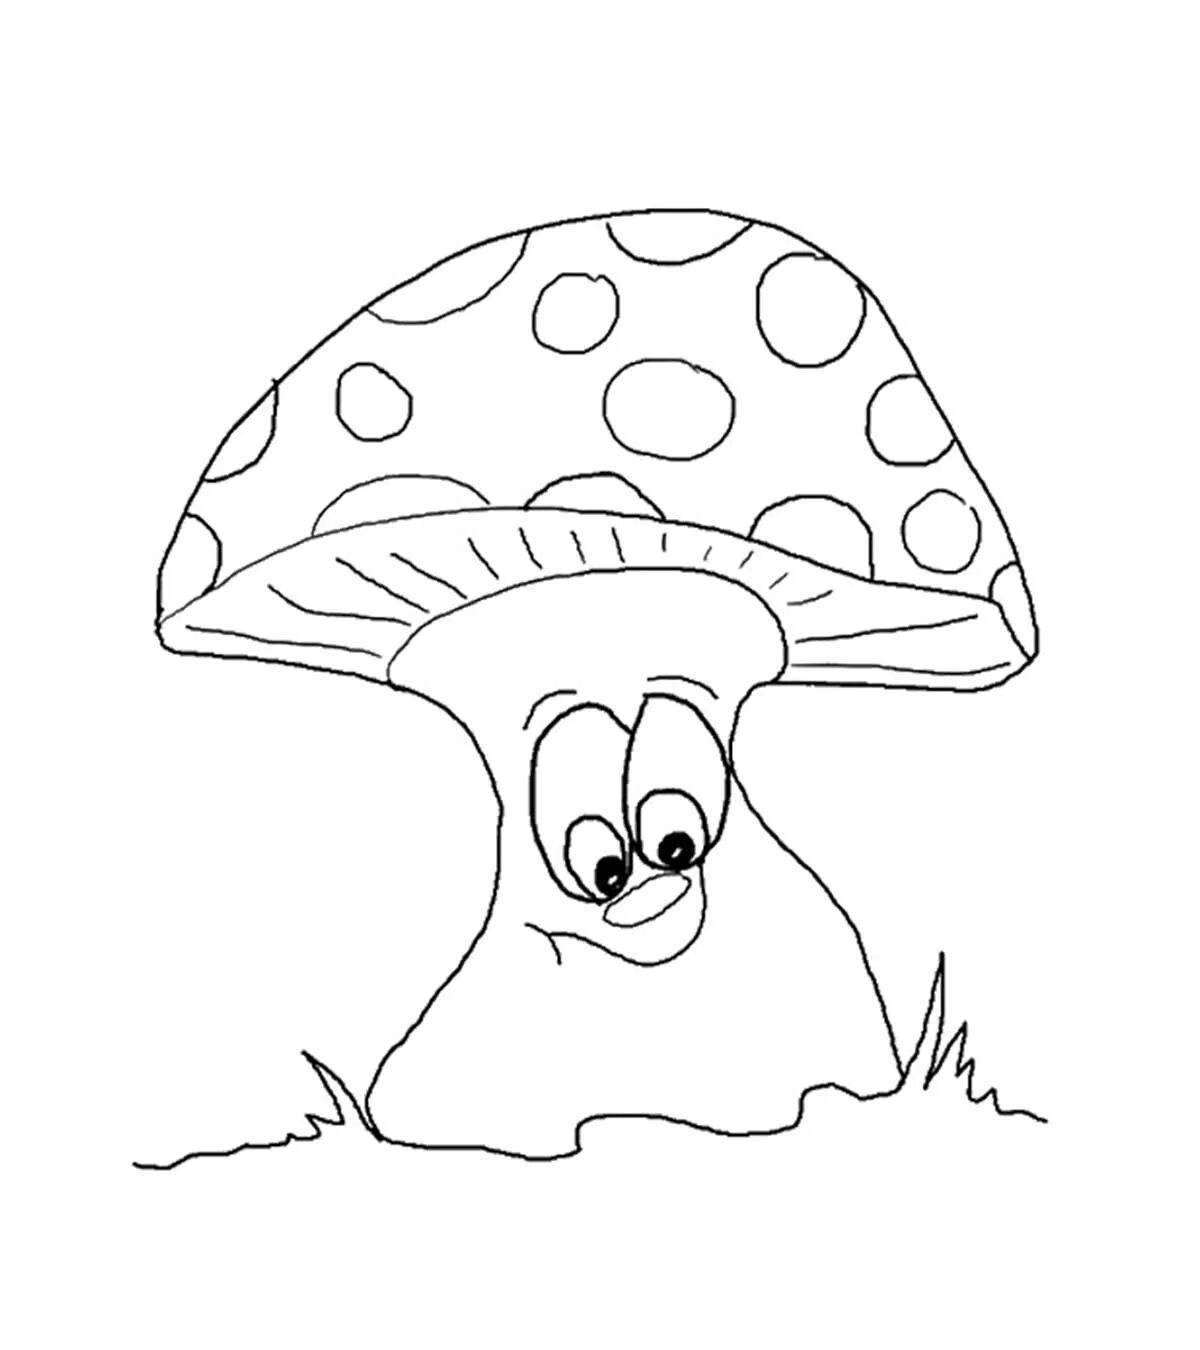 Coloring page playful fly agaric frog